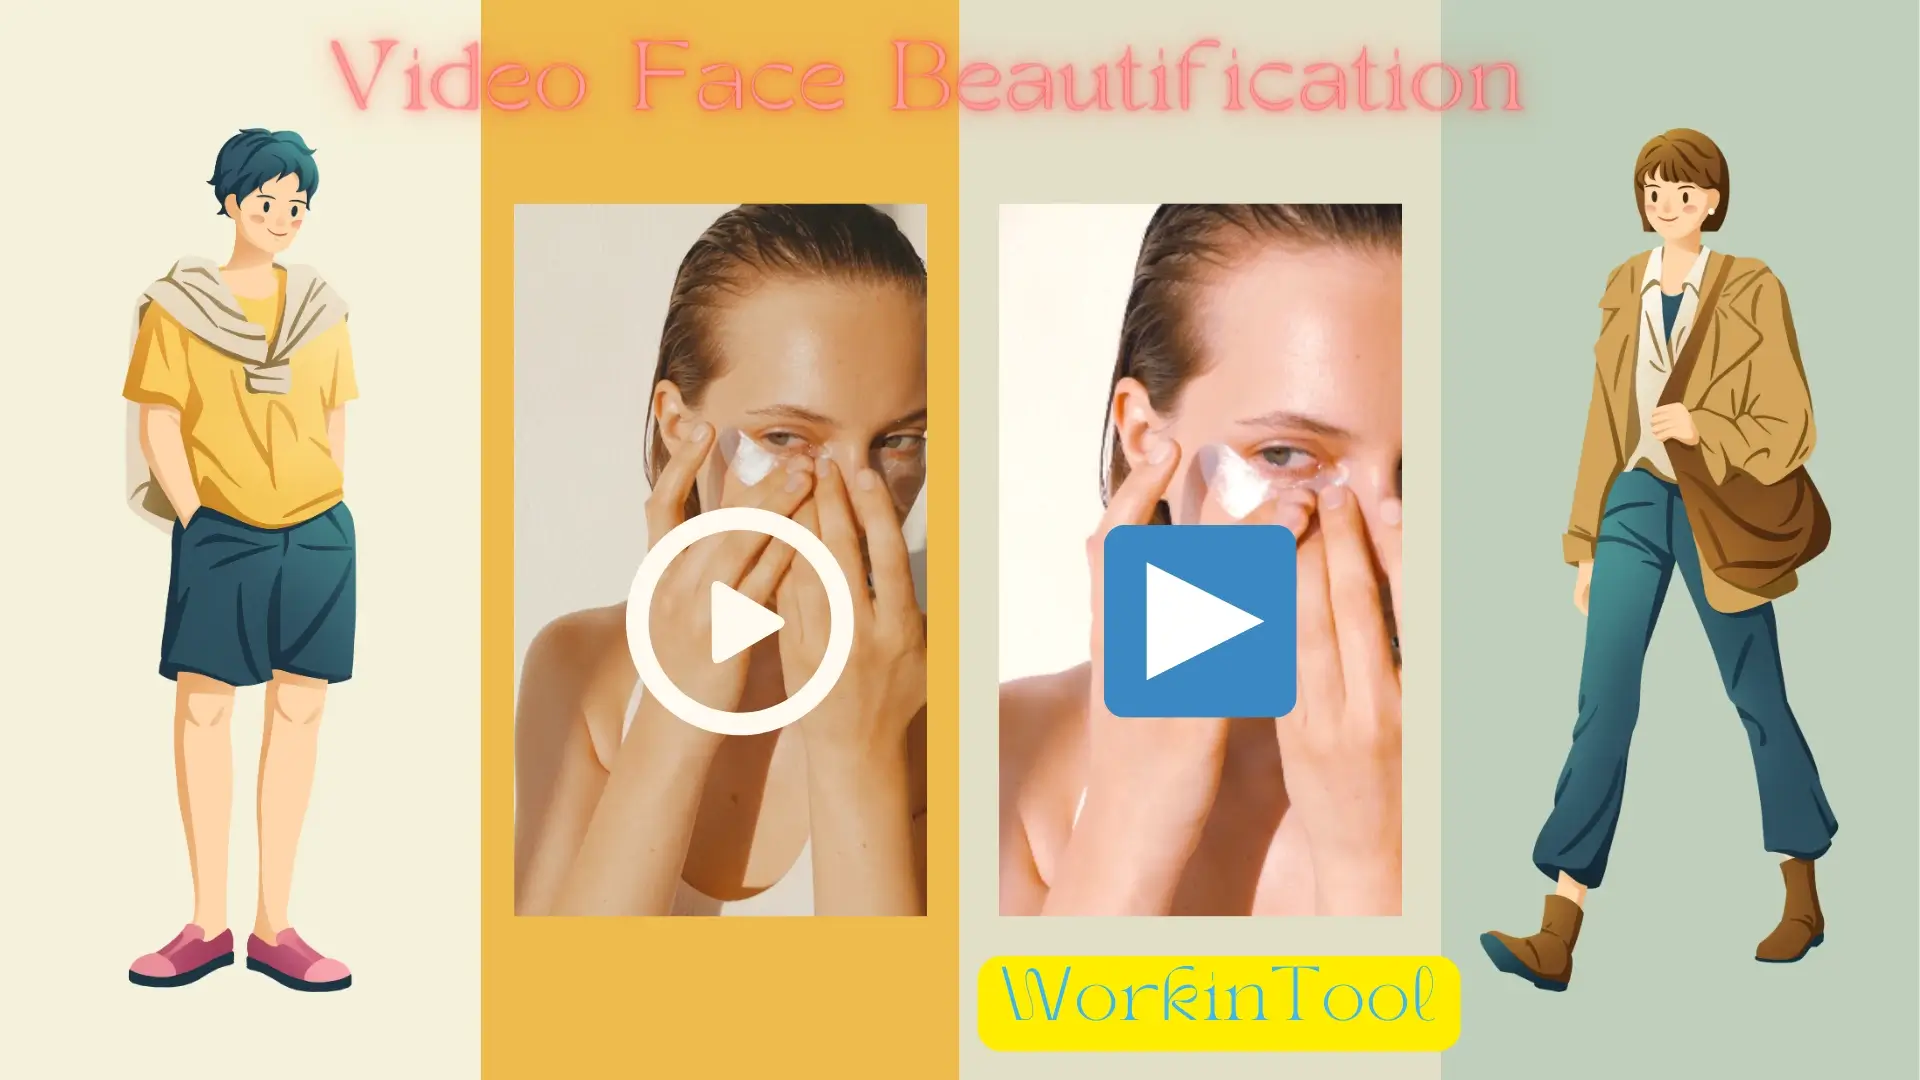 Video Face Beautification: How to Beautify Yourself in a Video